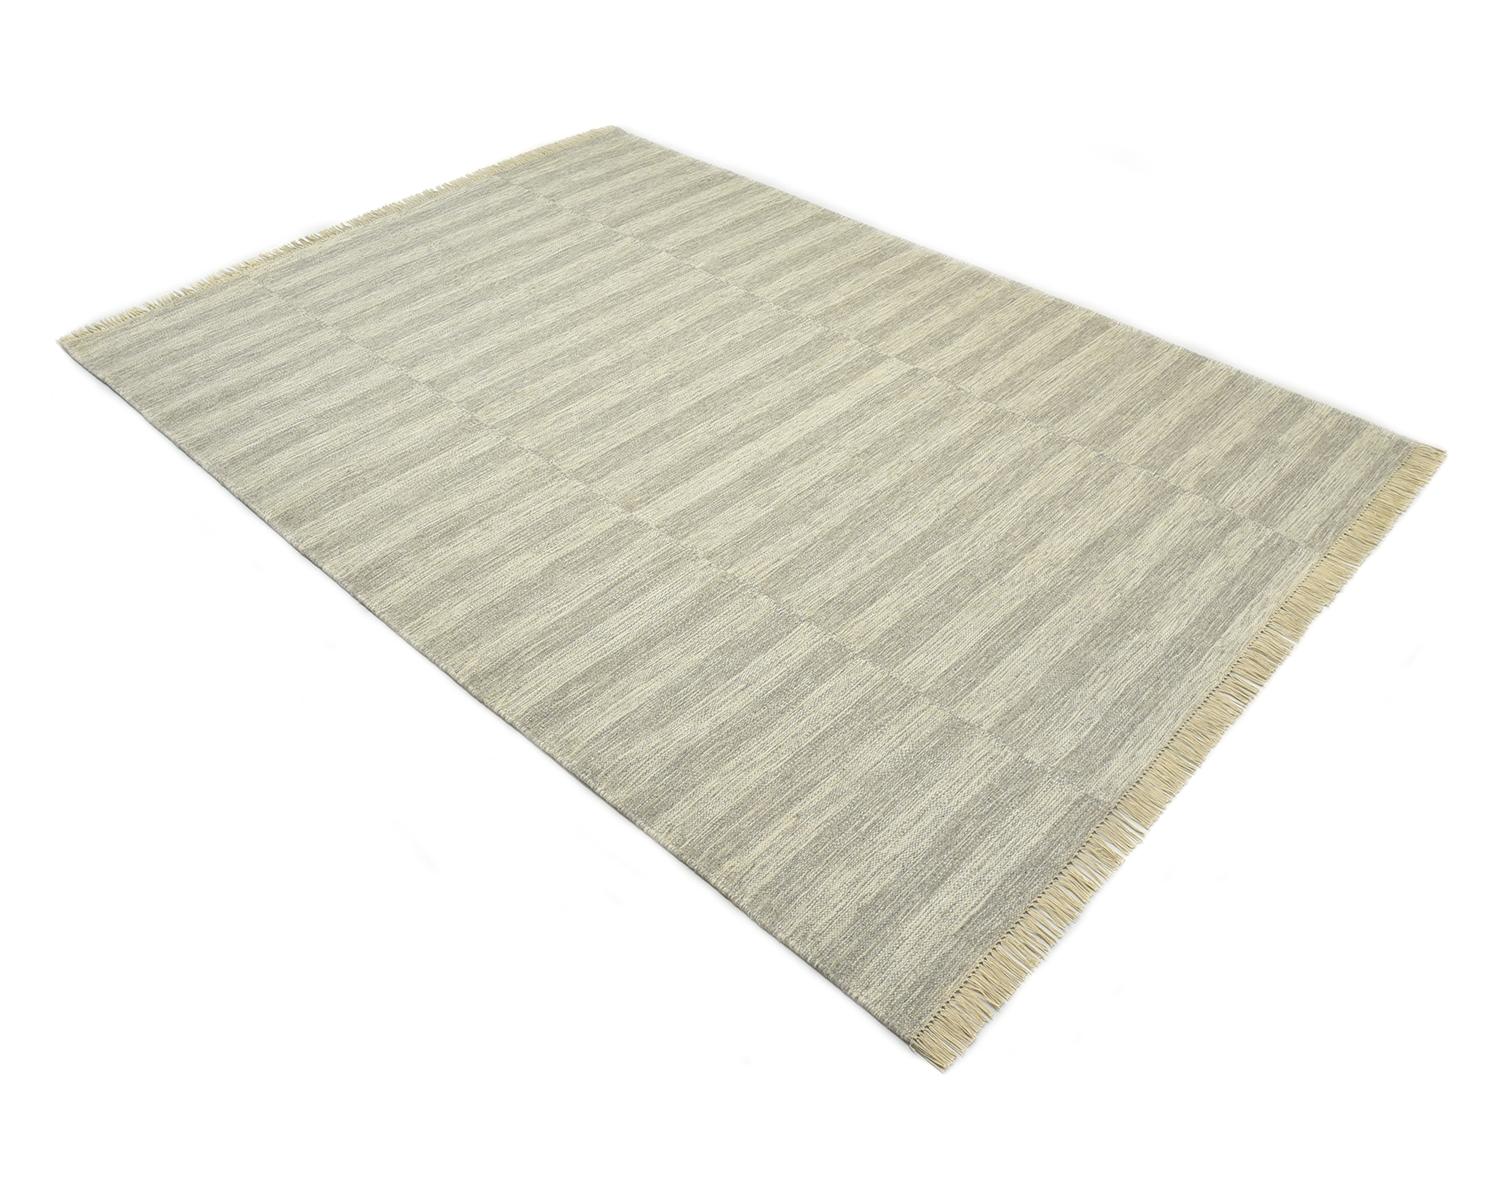 Indian Made Hand Woven Contemporary Flatweave Area Rug (Wolle) im Angebot